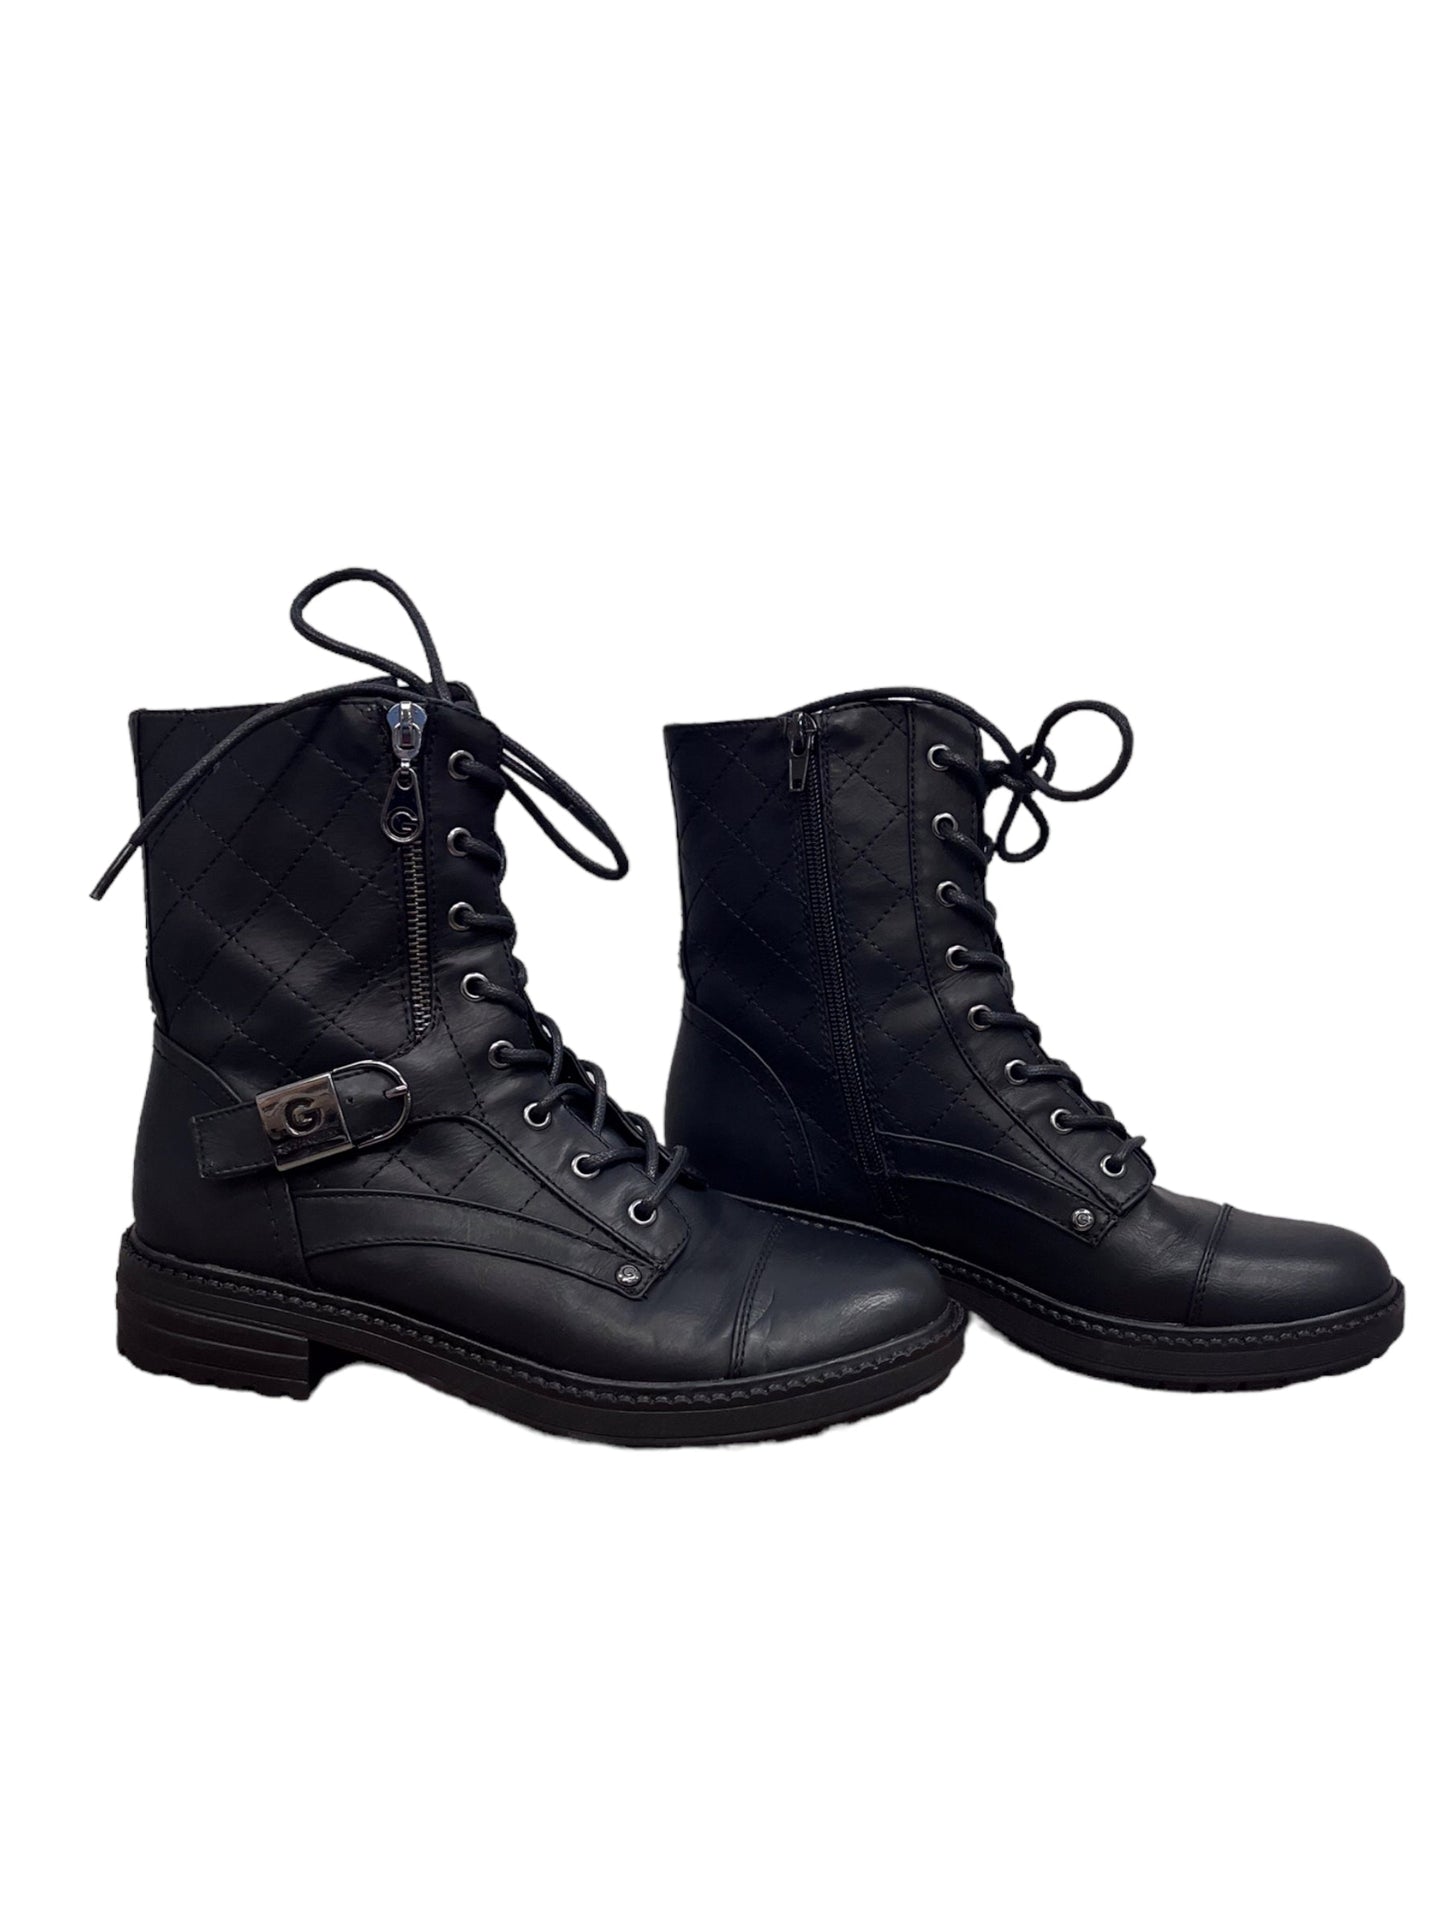 Boots Combat By Guess  Size: 7.5